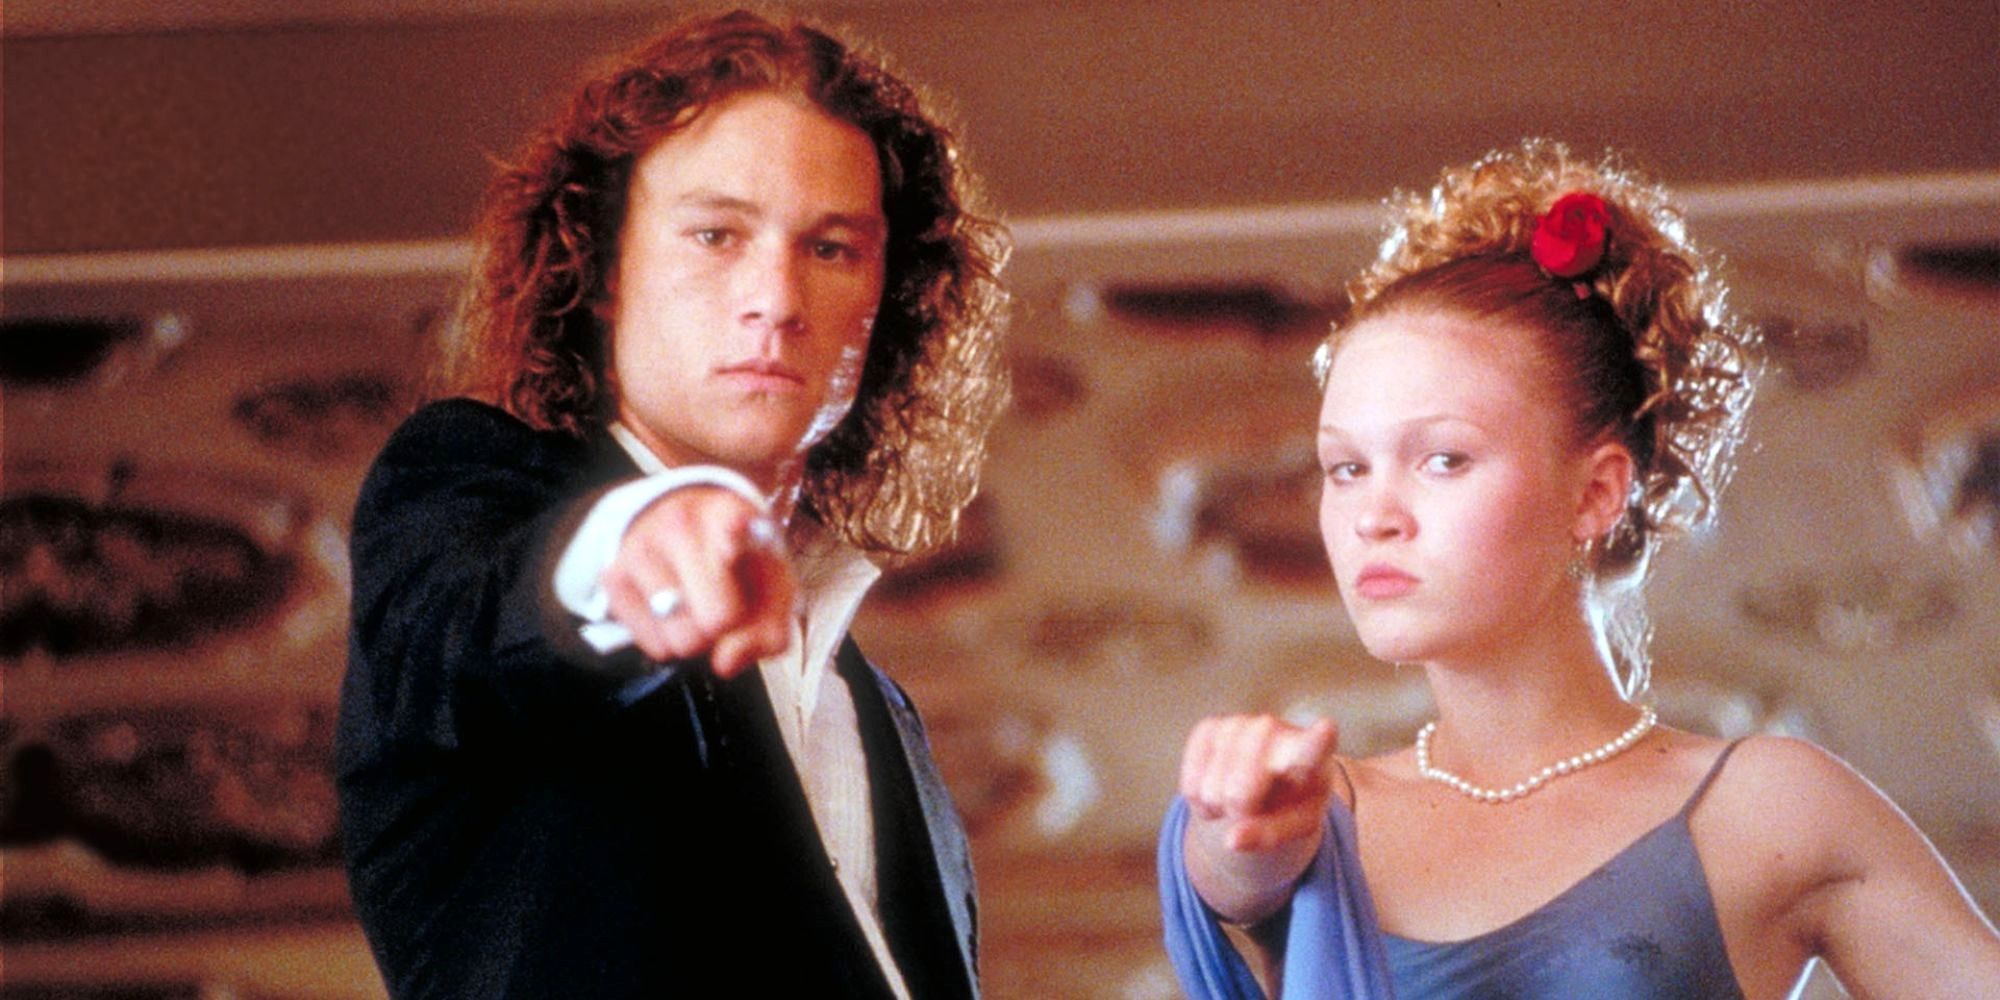 Heath Ledger and Julia Stiles pointing at the camera in 10 Things I Hate About You